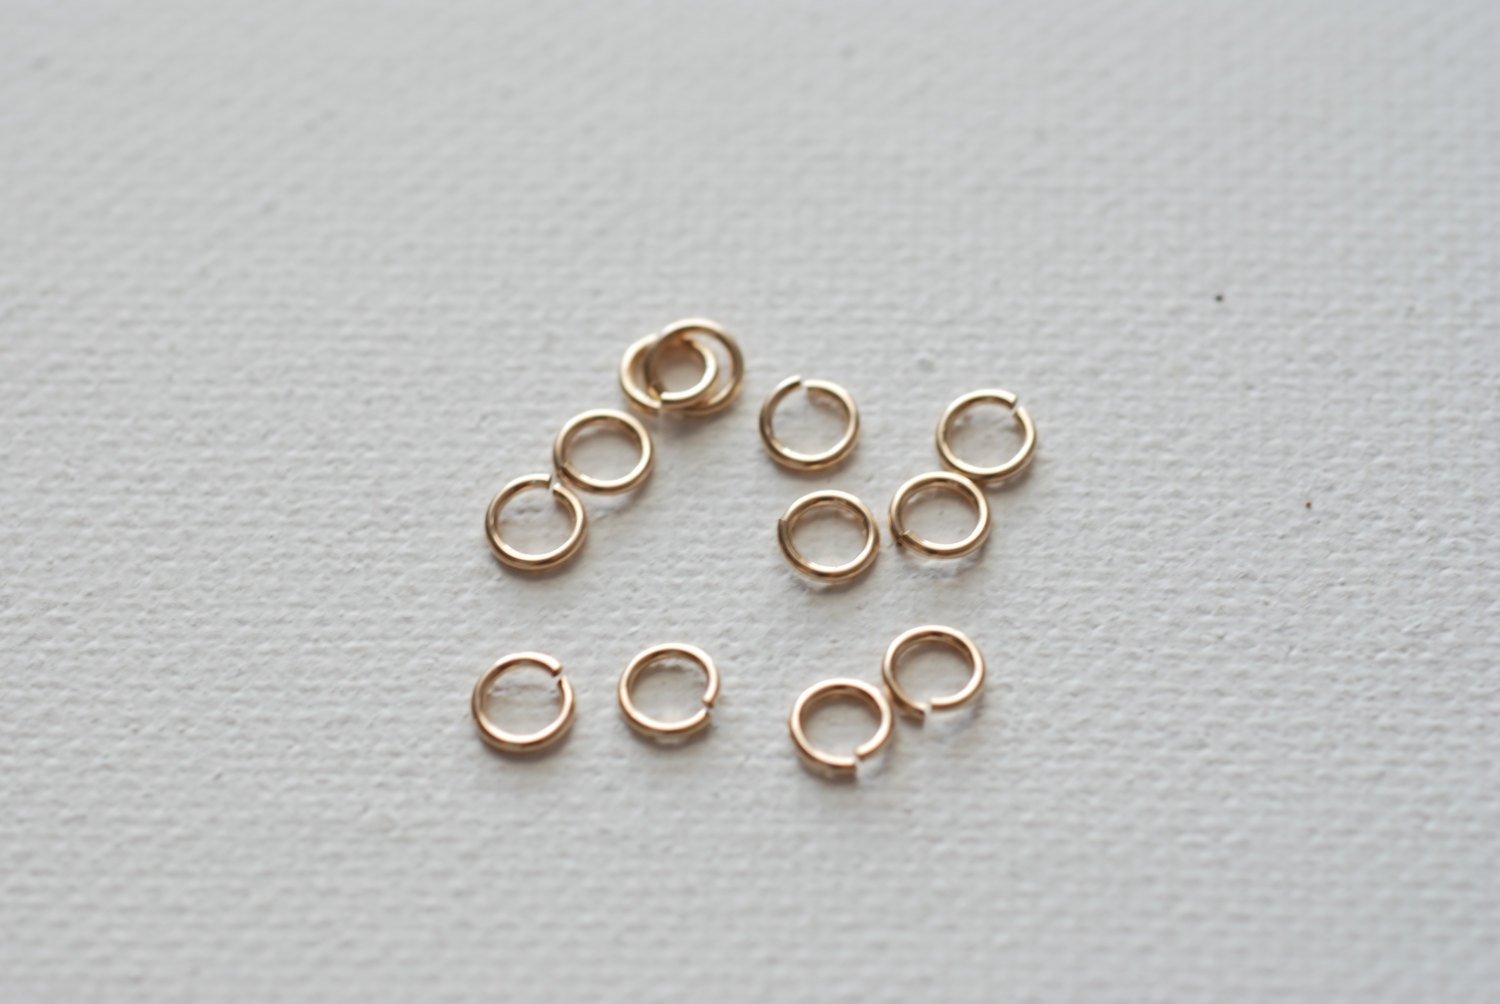 5mm Open Jump Ring-14k Gold Filled, 20 Gauge,25 pcs, Jewelry Findings - HarperCrown